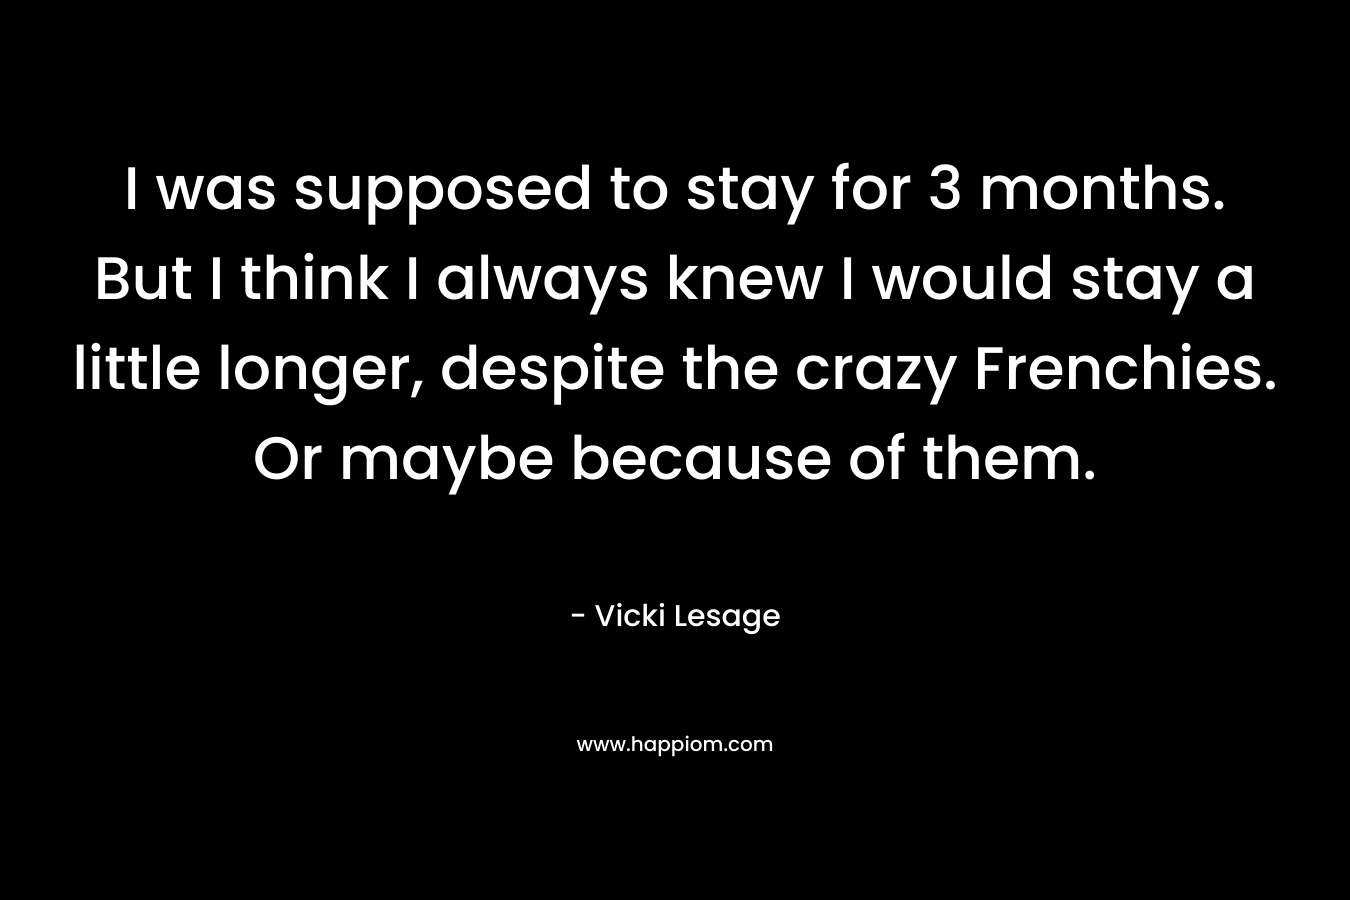 I was supposed to stay for 3 months. But I think I always knew I would stay a little longer, despite the crazy Frenchies. Or maybe because of them. – Vicki Lesage